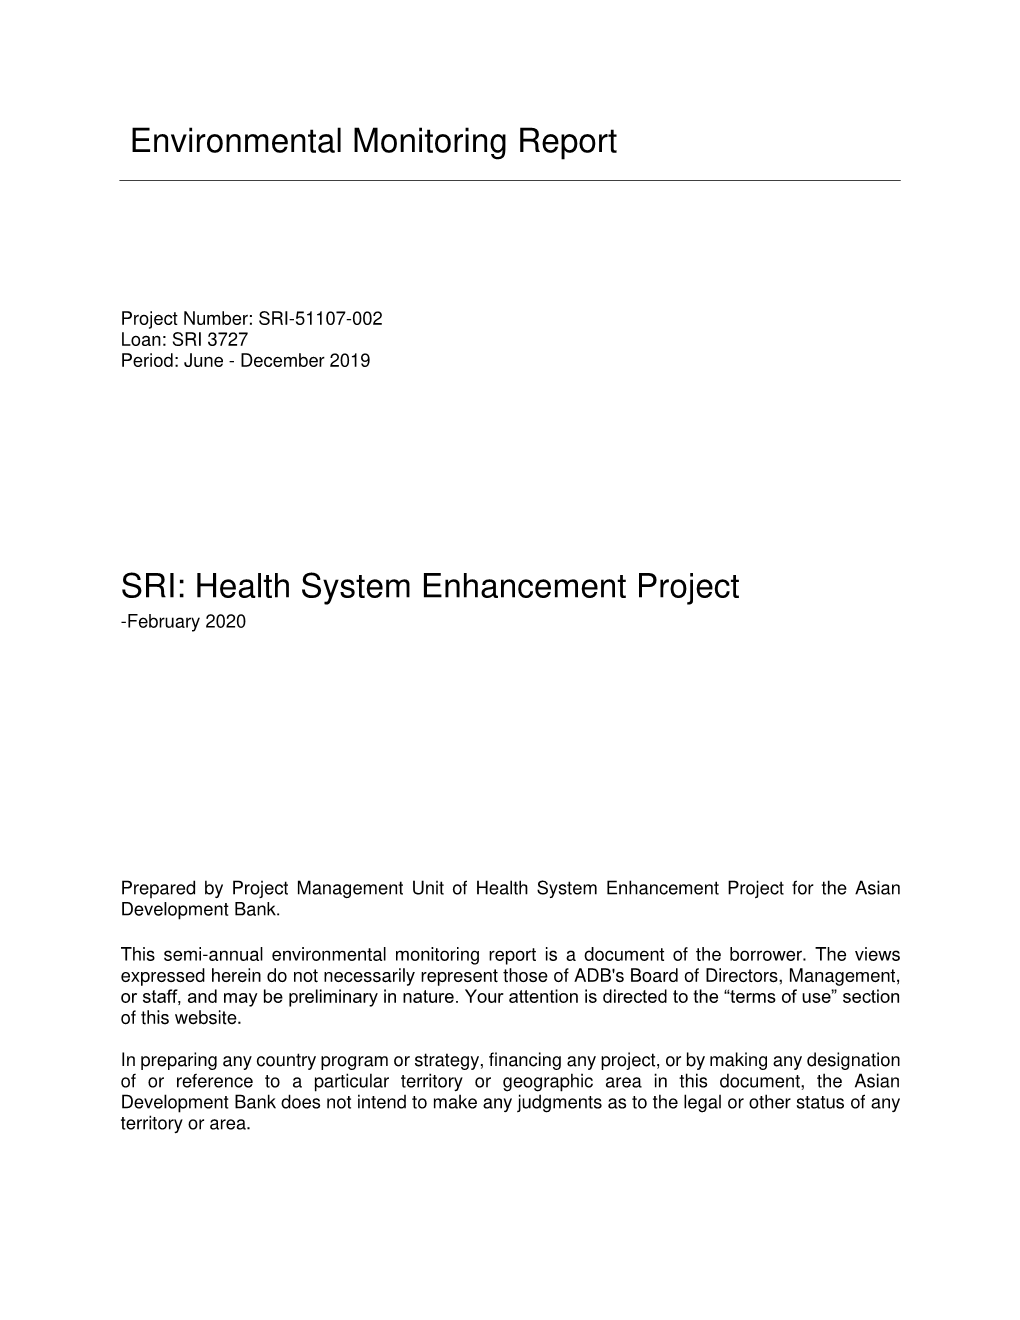 51107-002: Health System Enhancement Project